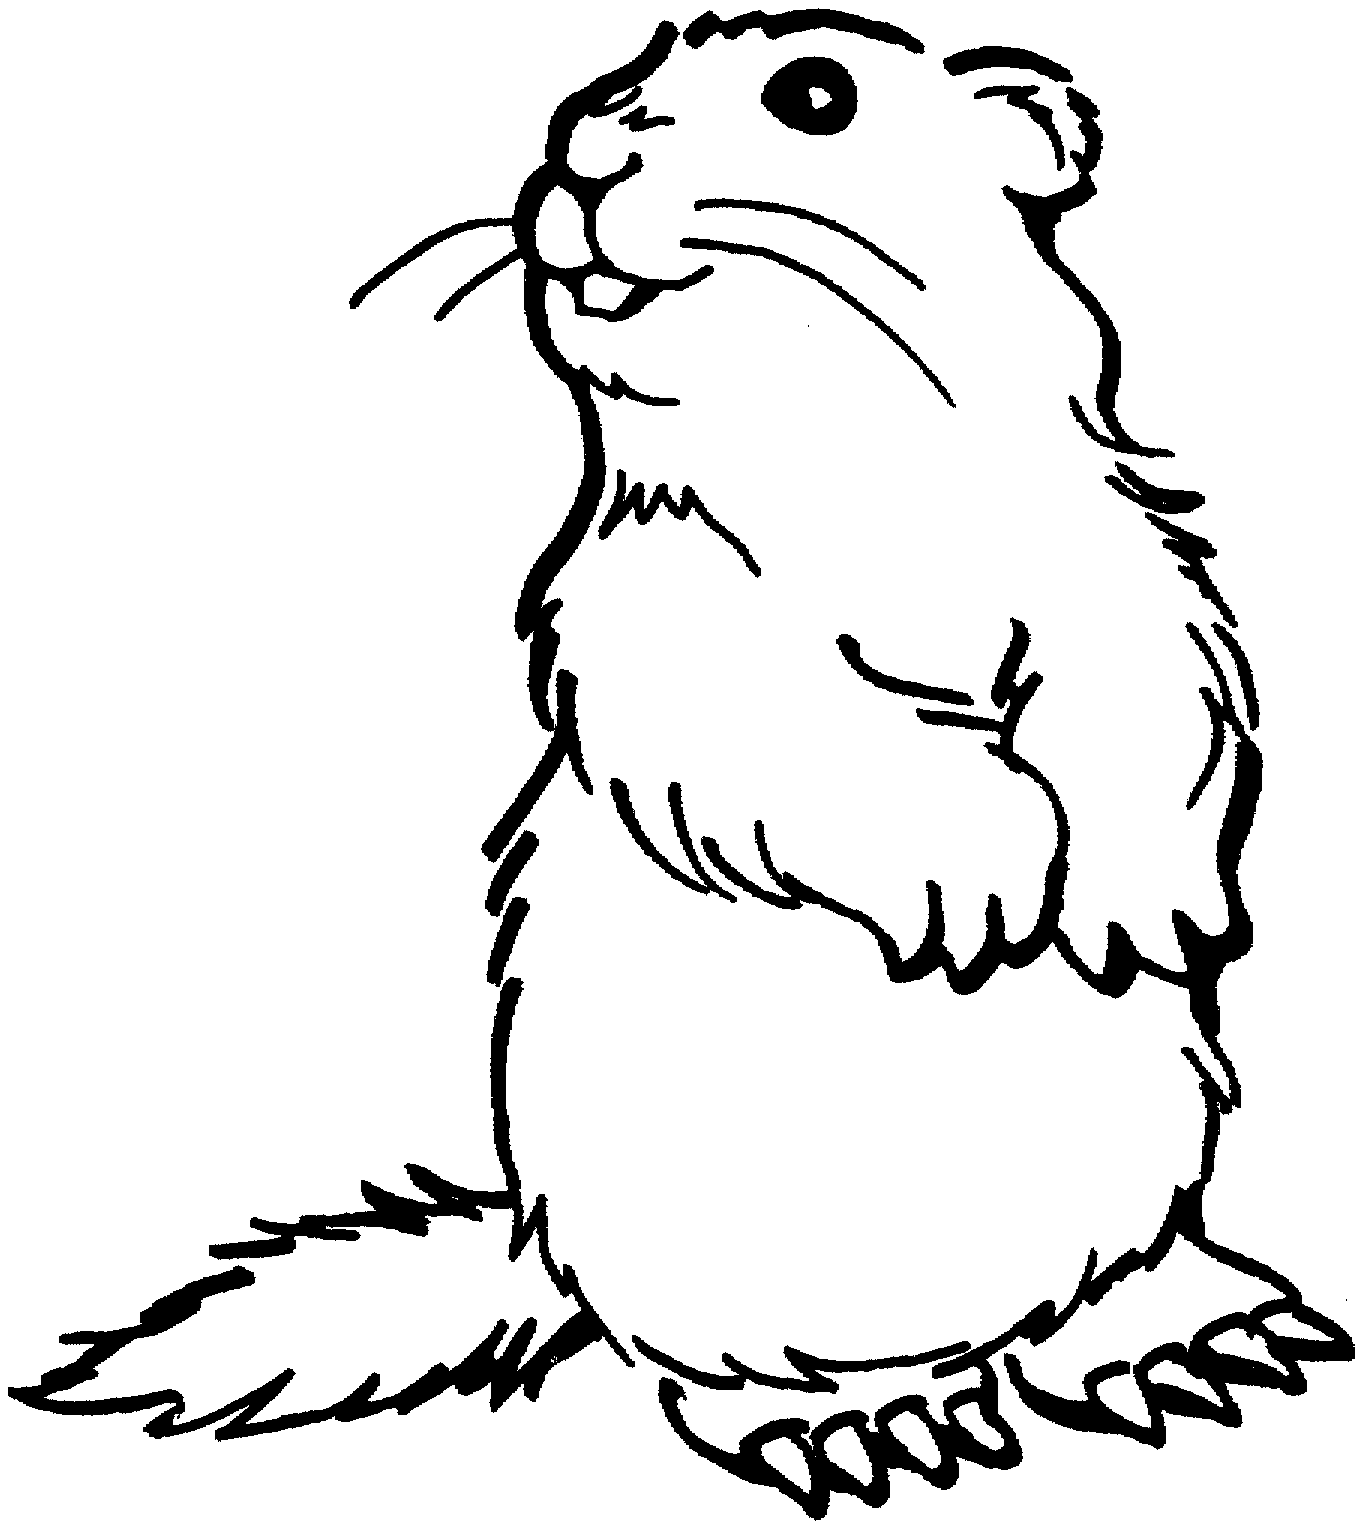 Prarie Dogs clipart